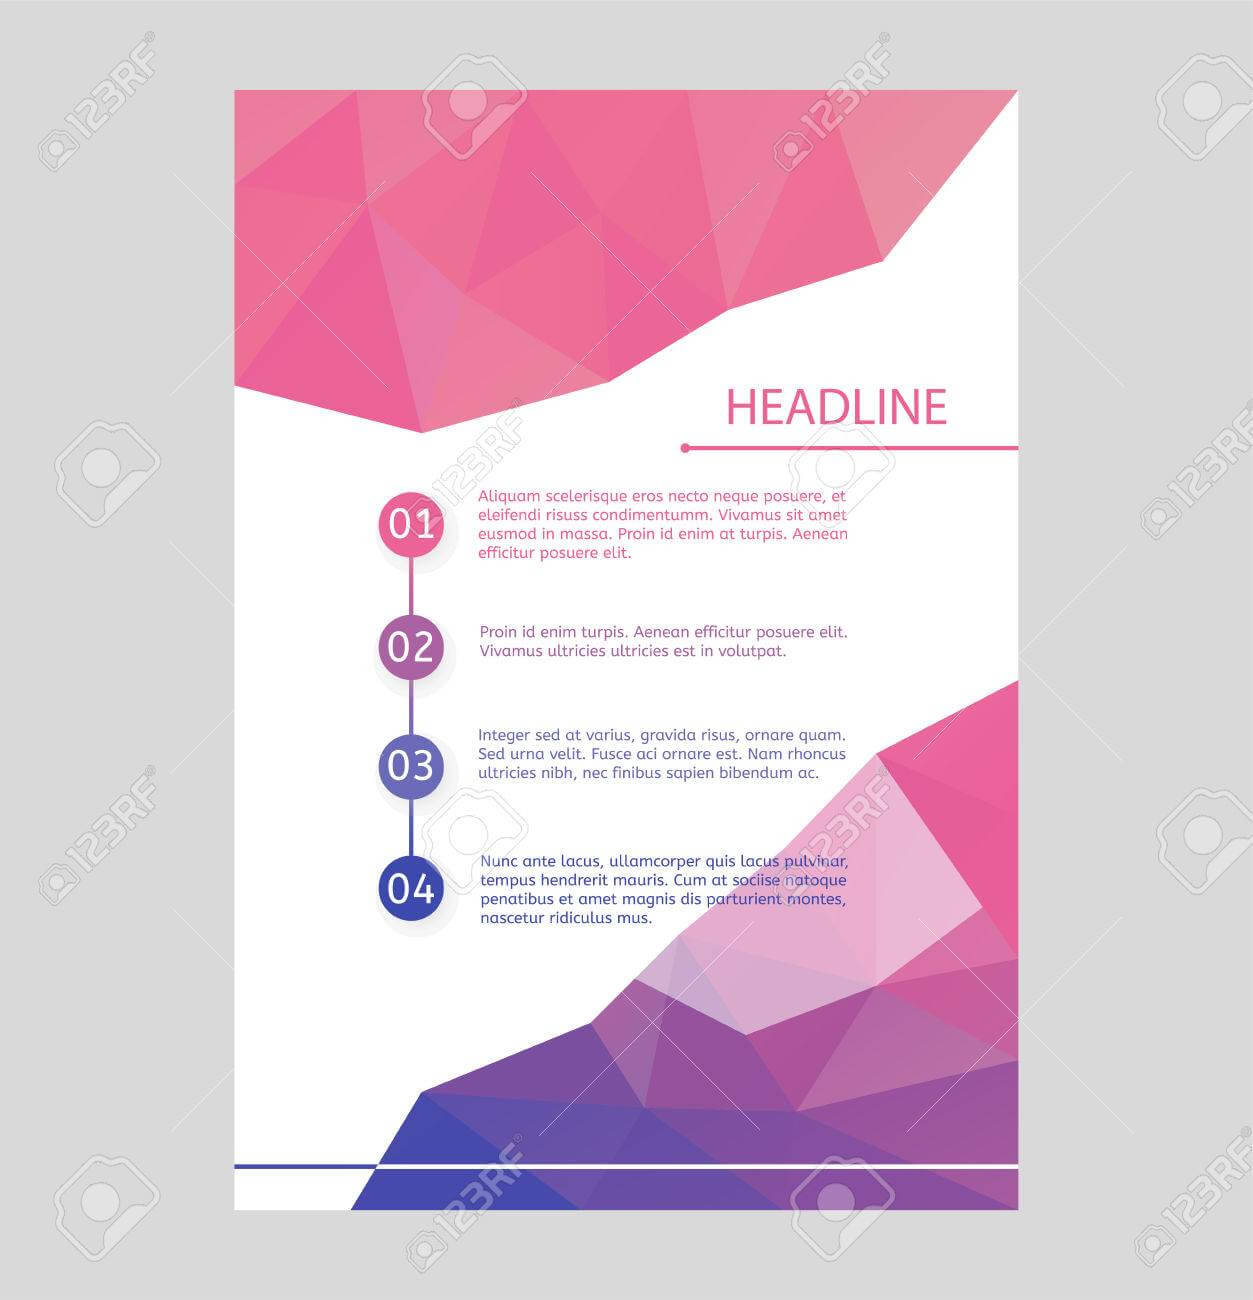 003 Free Blank Flyer Templates Template Unusual Ideas Pertaining To Blank Flyer Templates Free